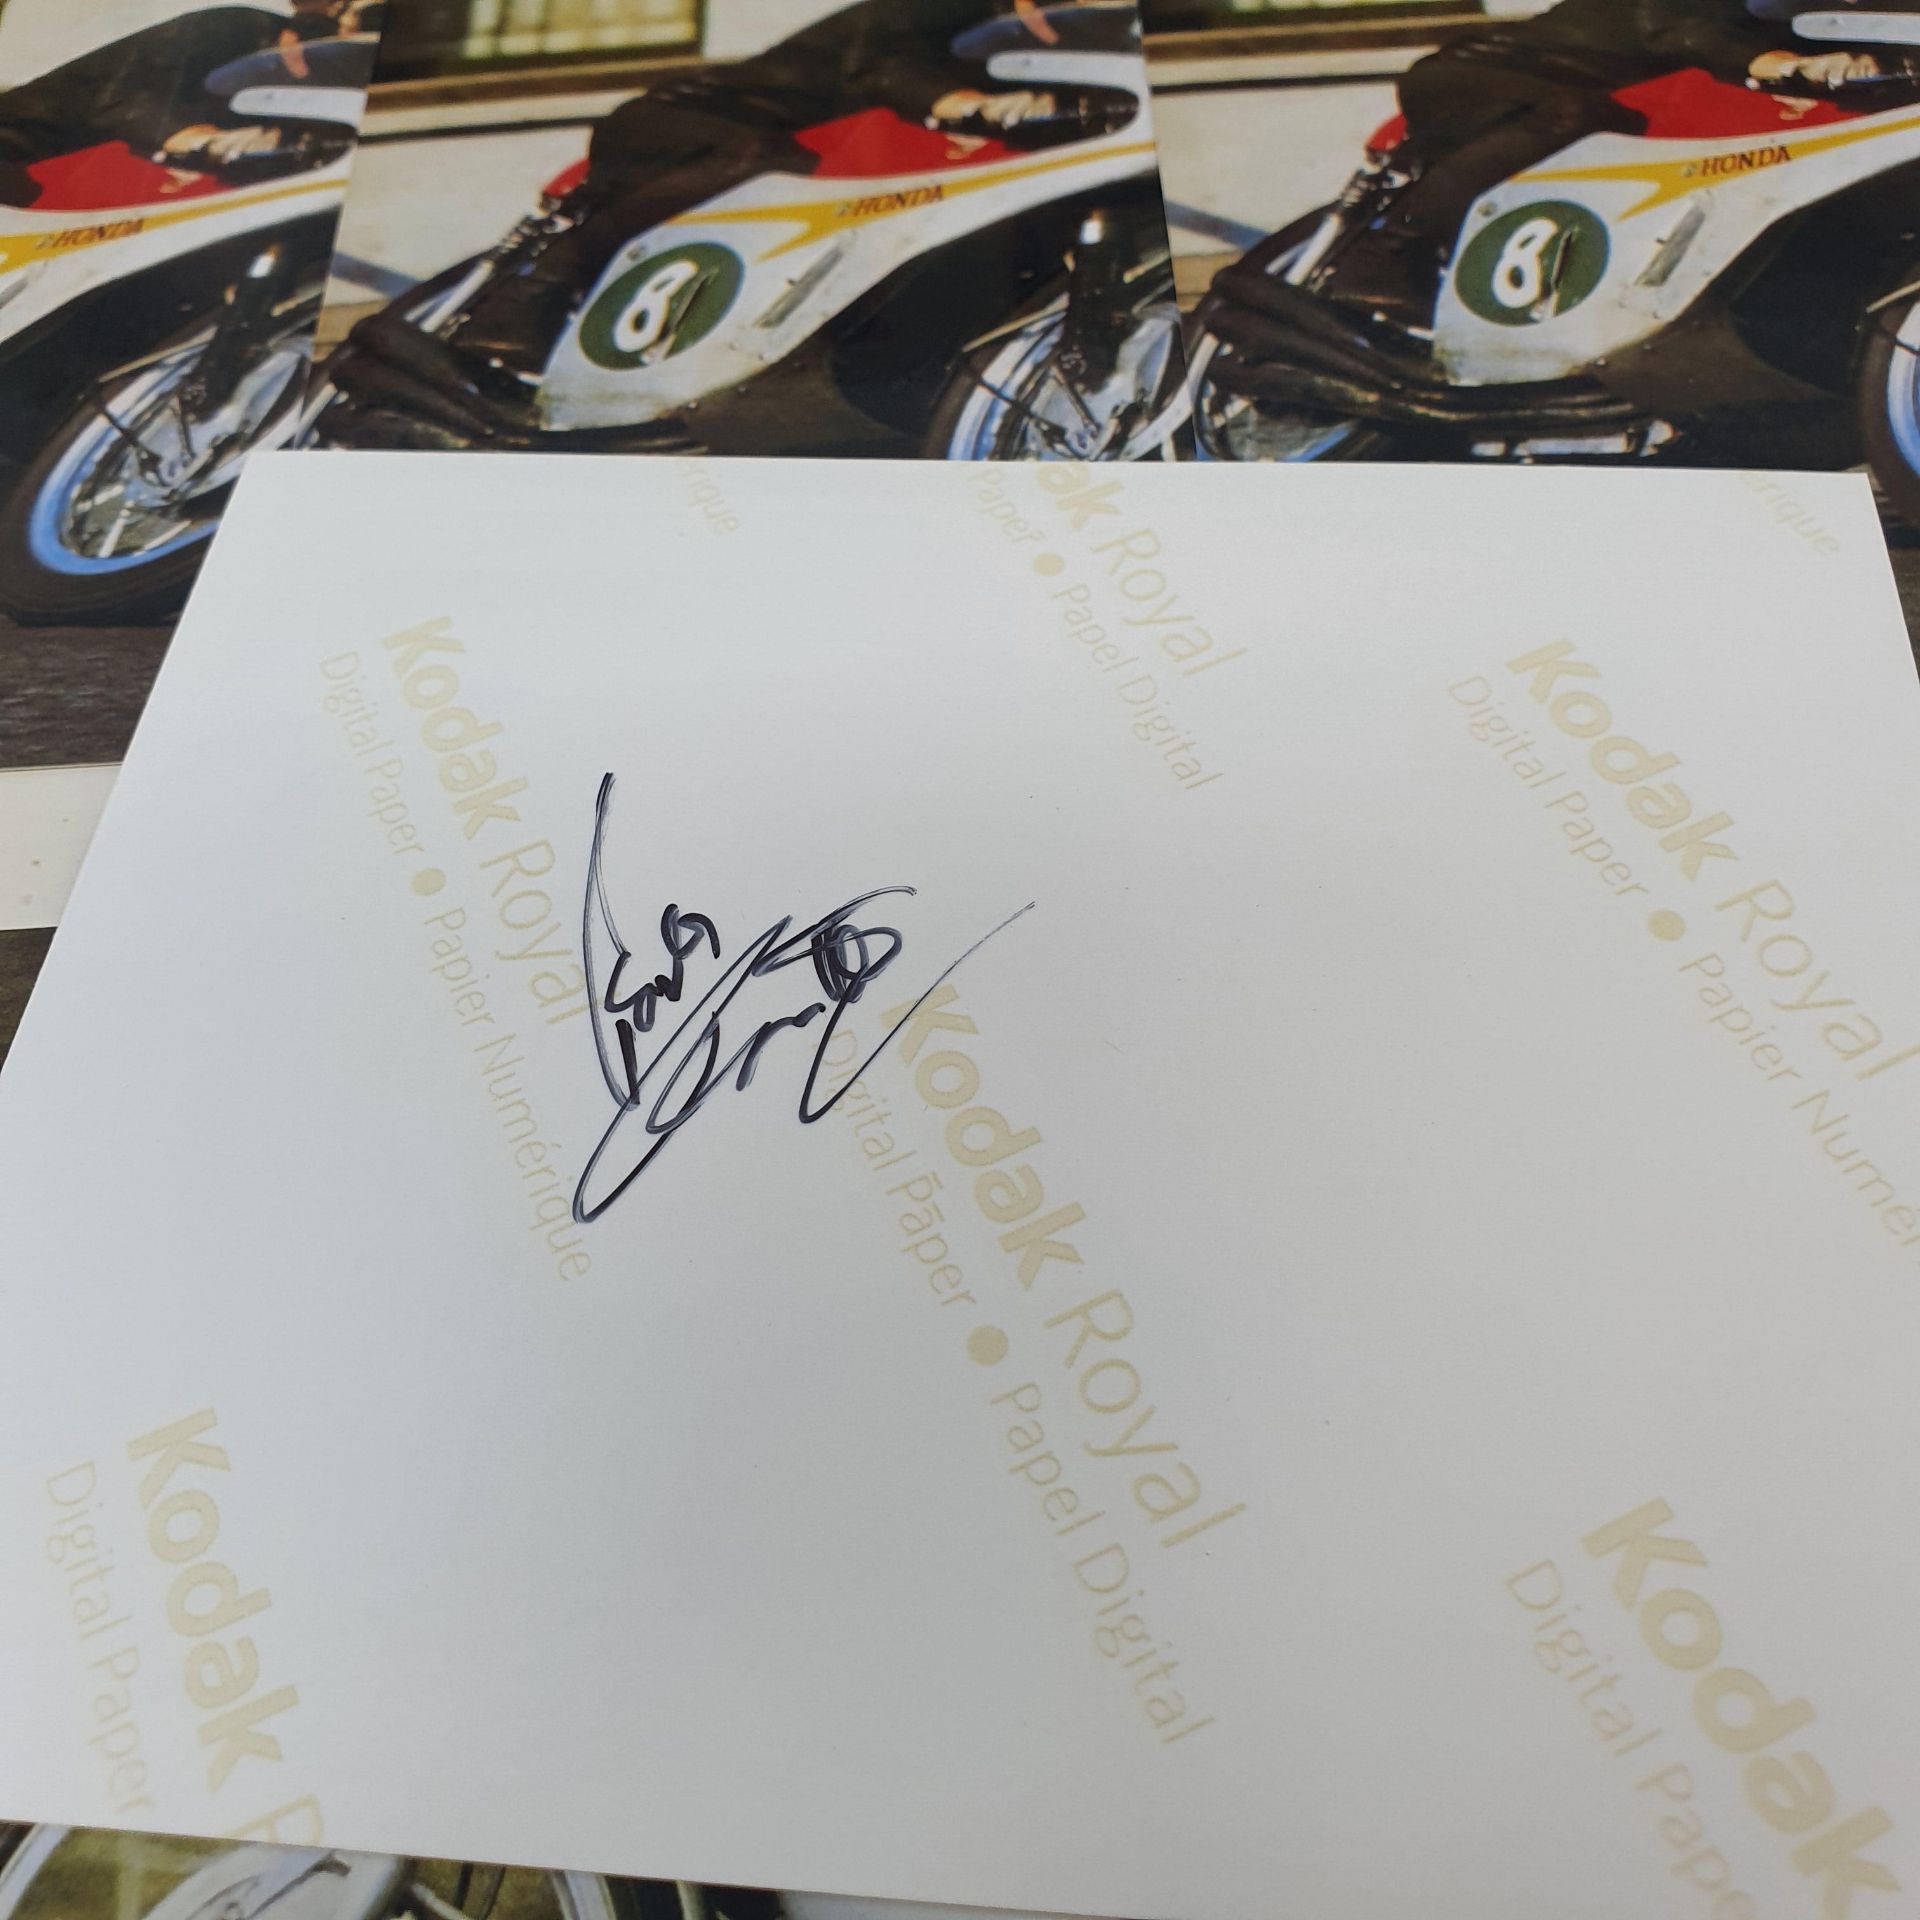 Of Bill Smith aboard various racing motorcycles, including the six cylinder Honda, all signed by - Image 2 of 2